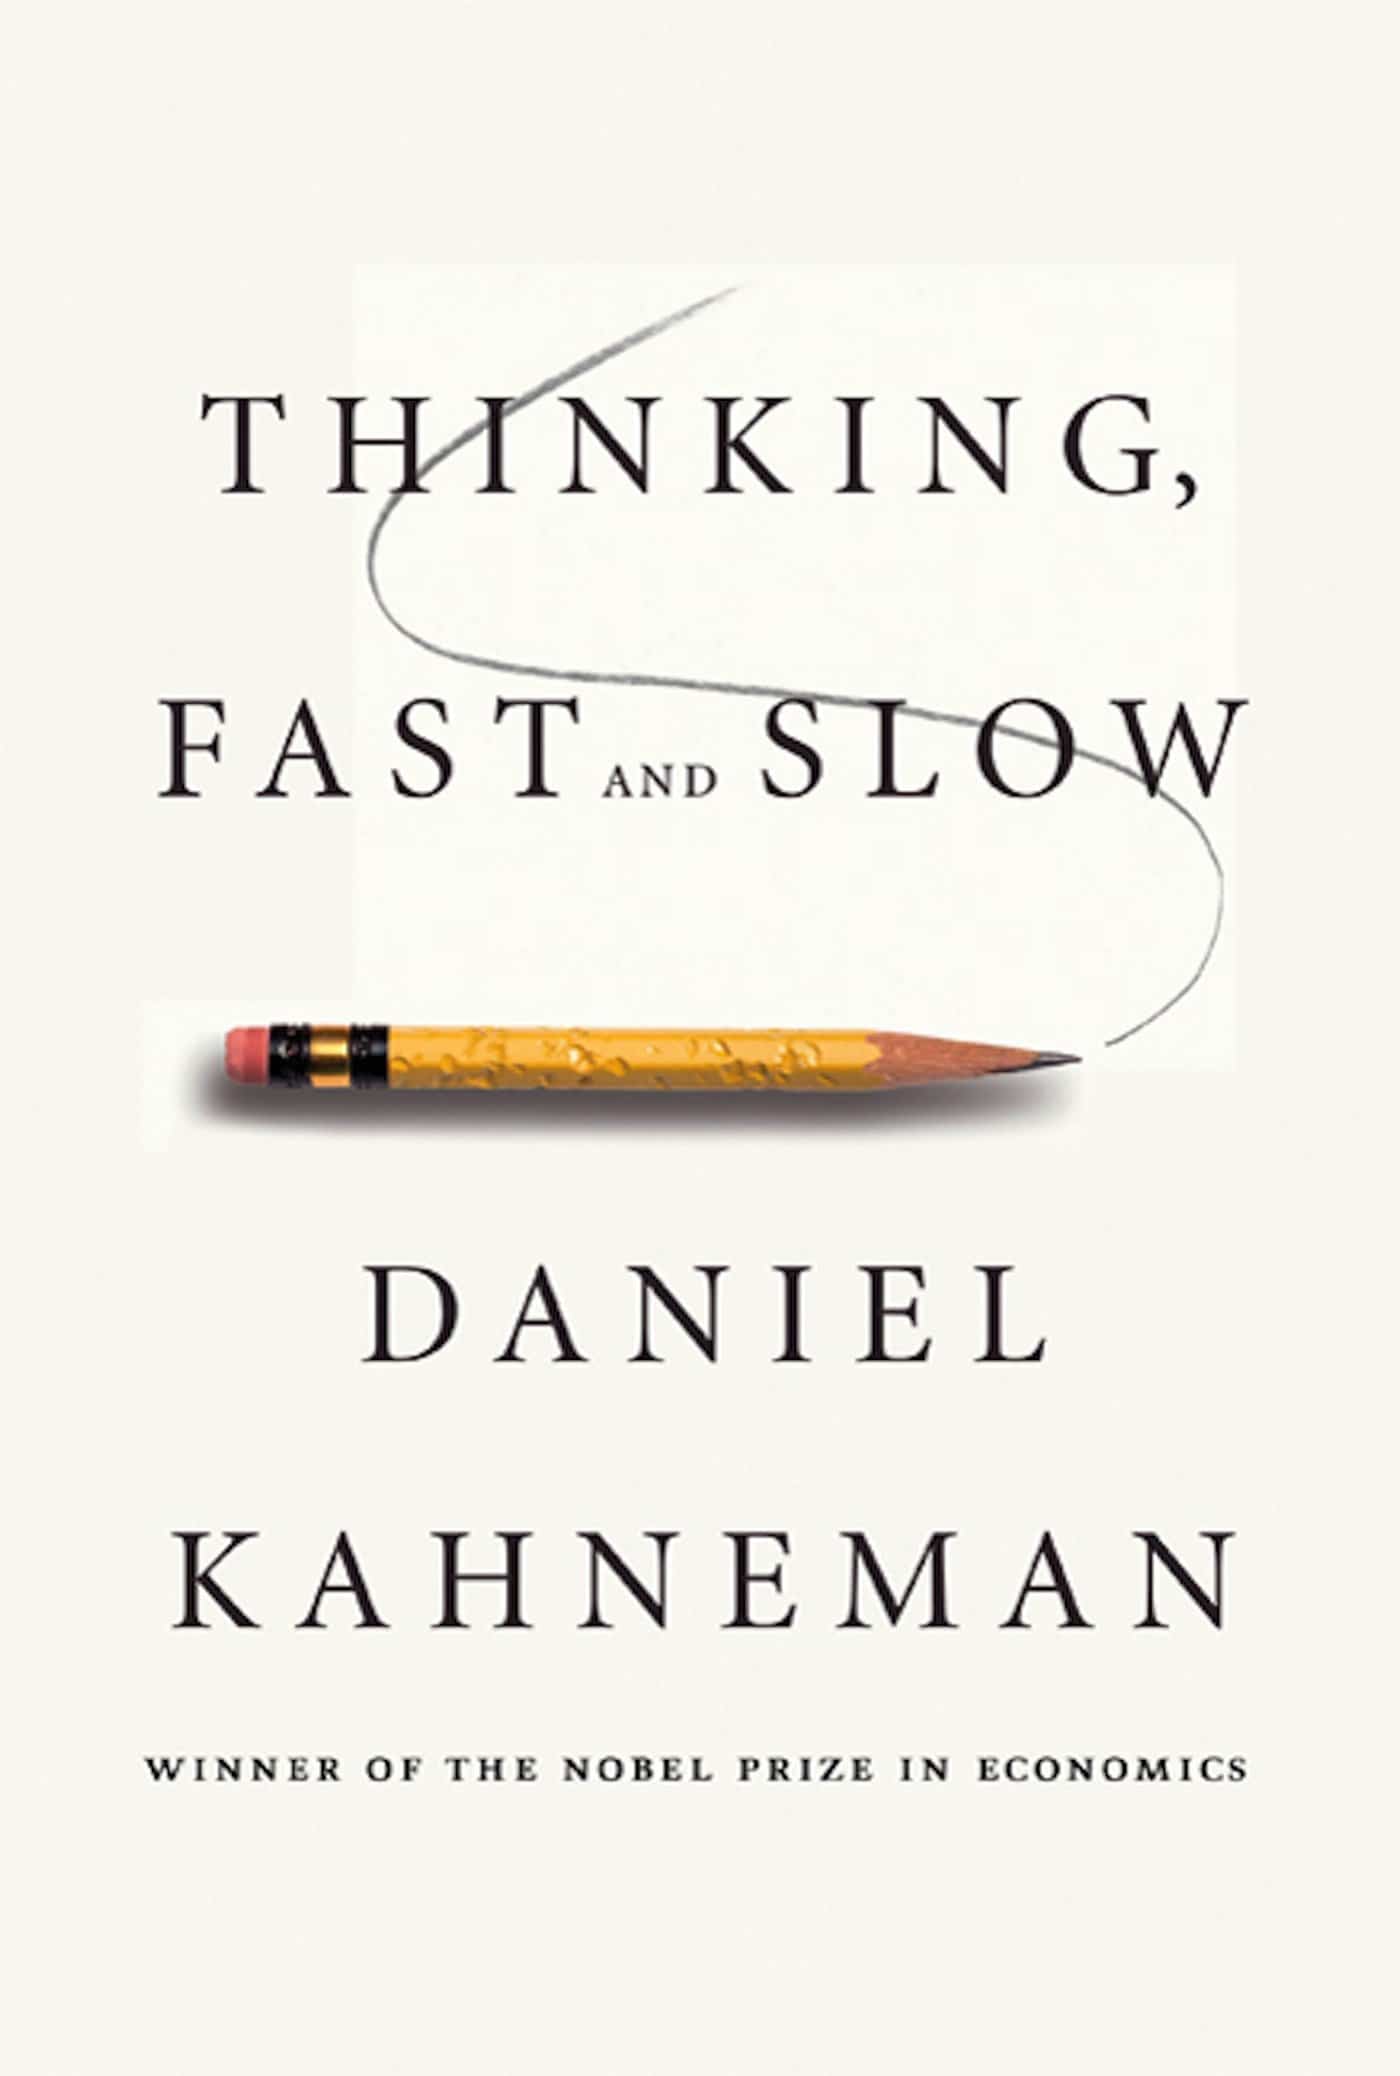 The cover of Thinking, Fast and Slow